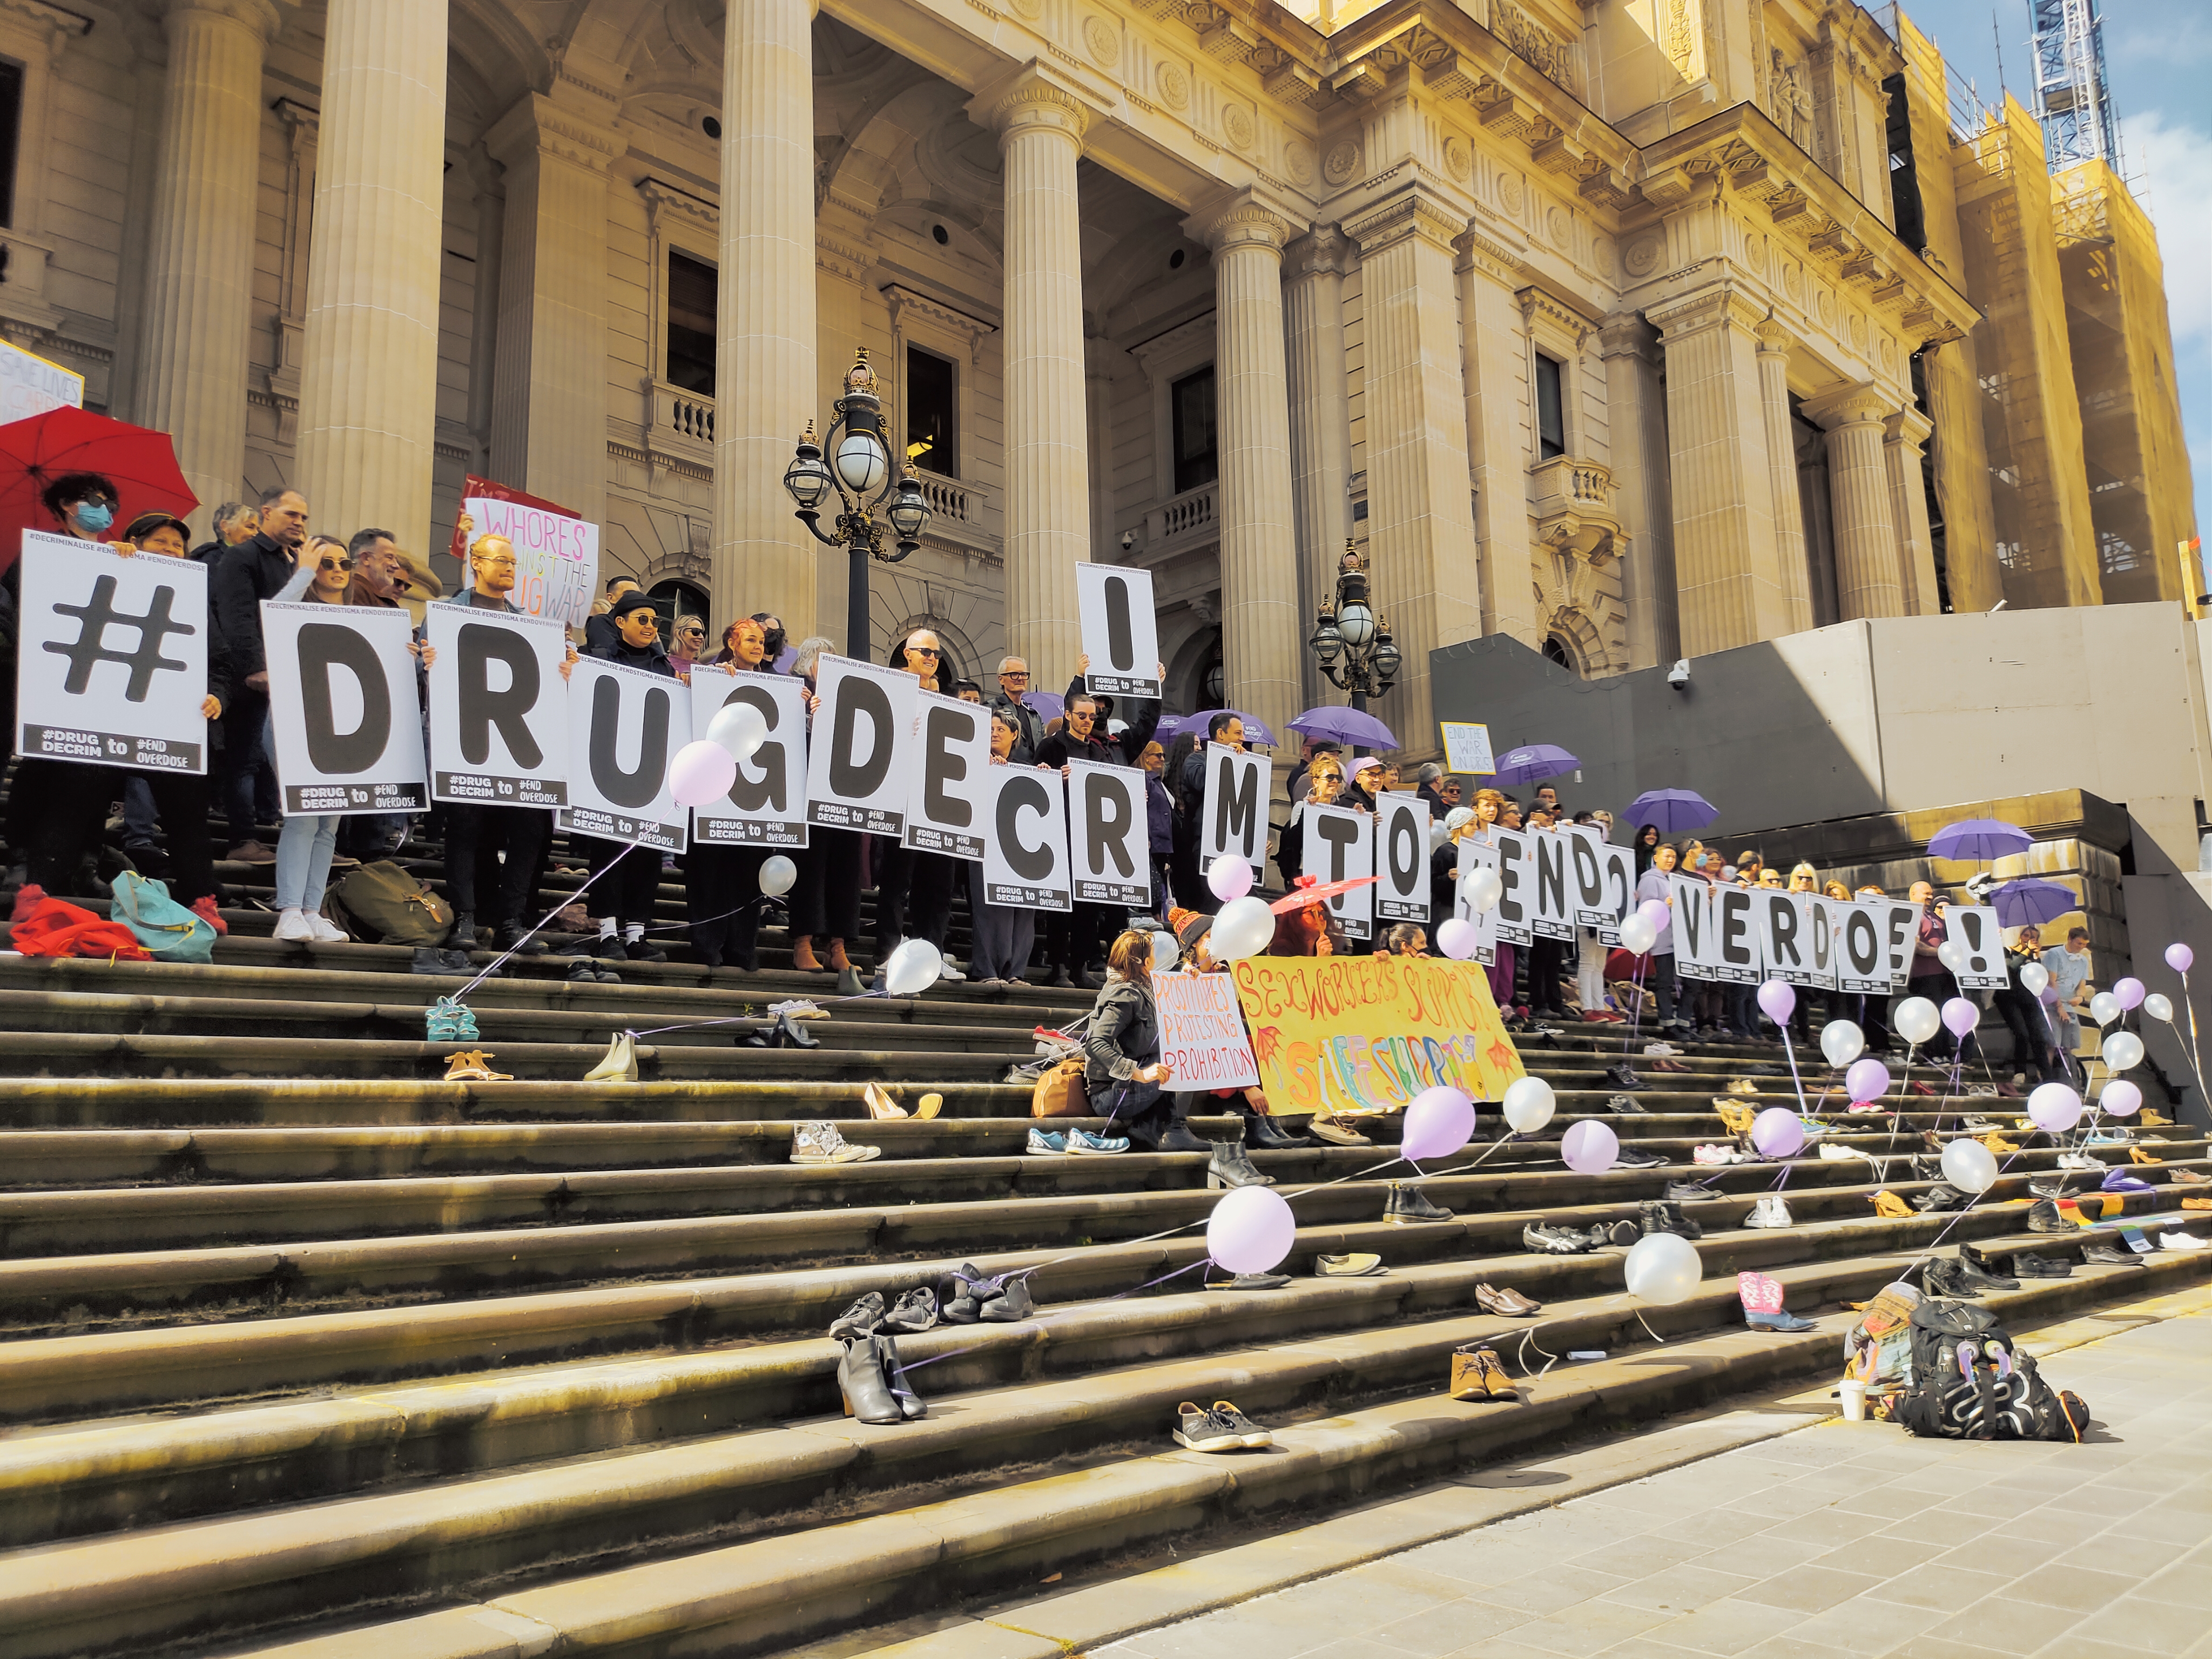 A crowd of people gather on the steps of Parliament House holding signs with individual letters that spell out "# DRUG DECRIM TO END OVERDOSE".